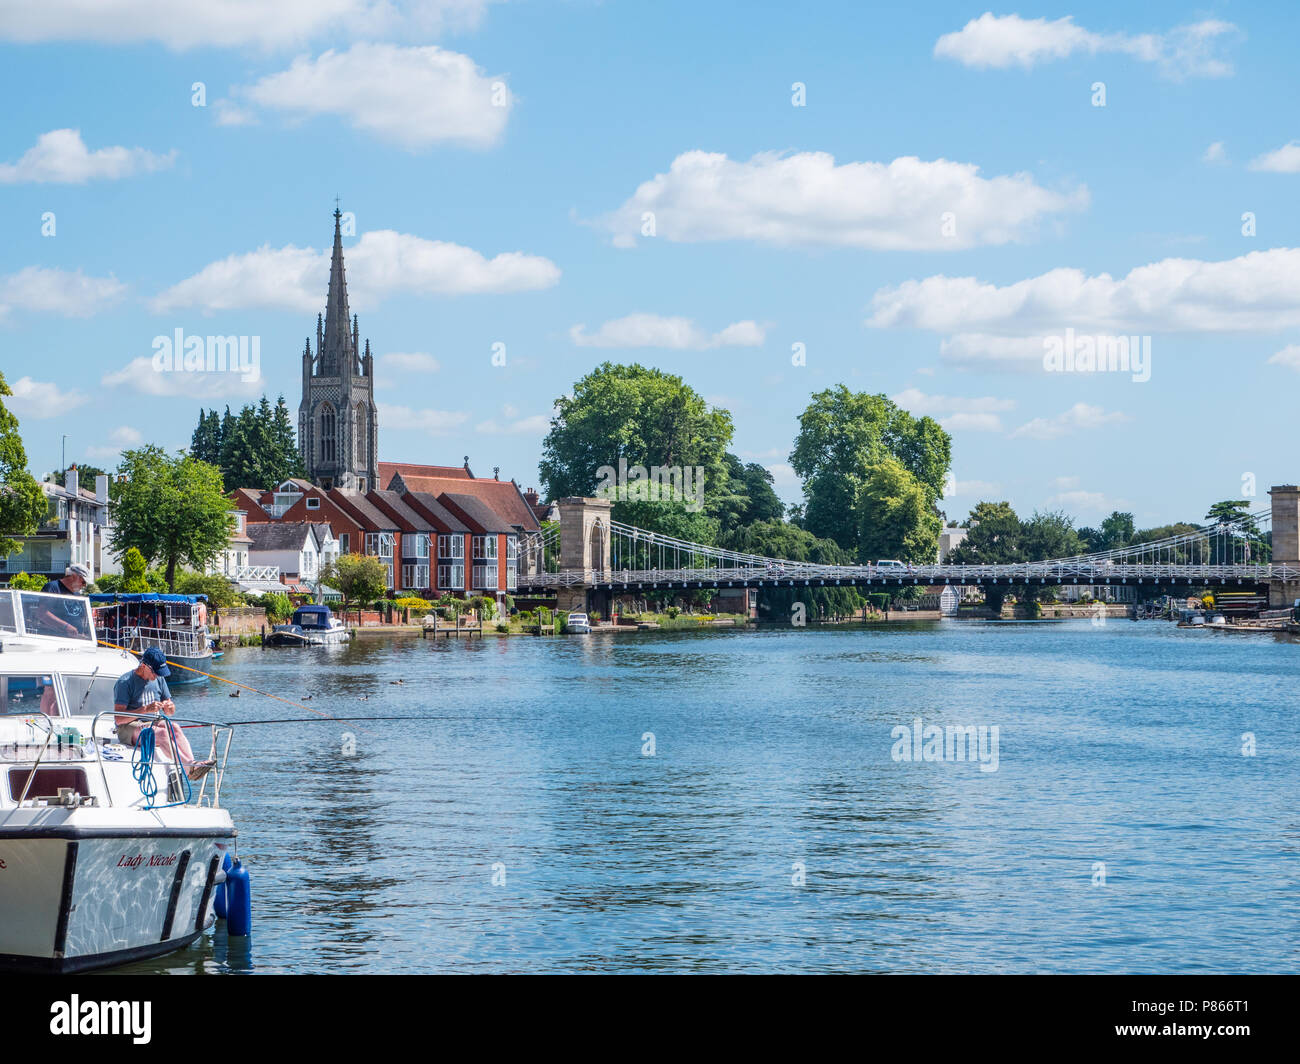 Man Fishing from Boat, with View of River Thames, All Saints Church, Marlow Suspension Bridge, Marlow, Buckinghamshire, England, UK, GB. Stock Photo